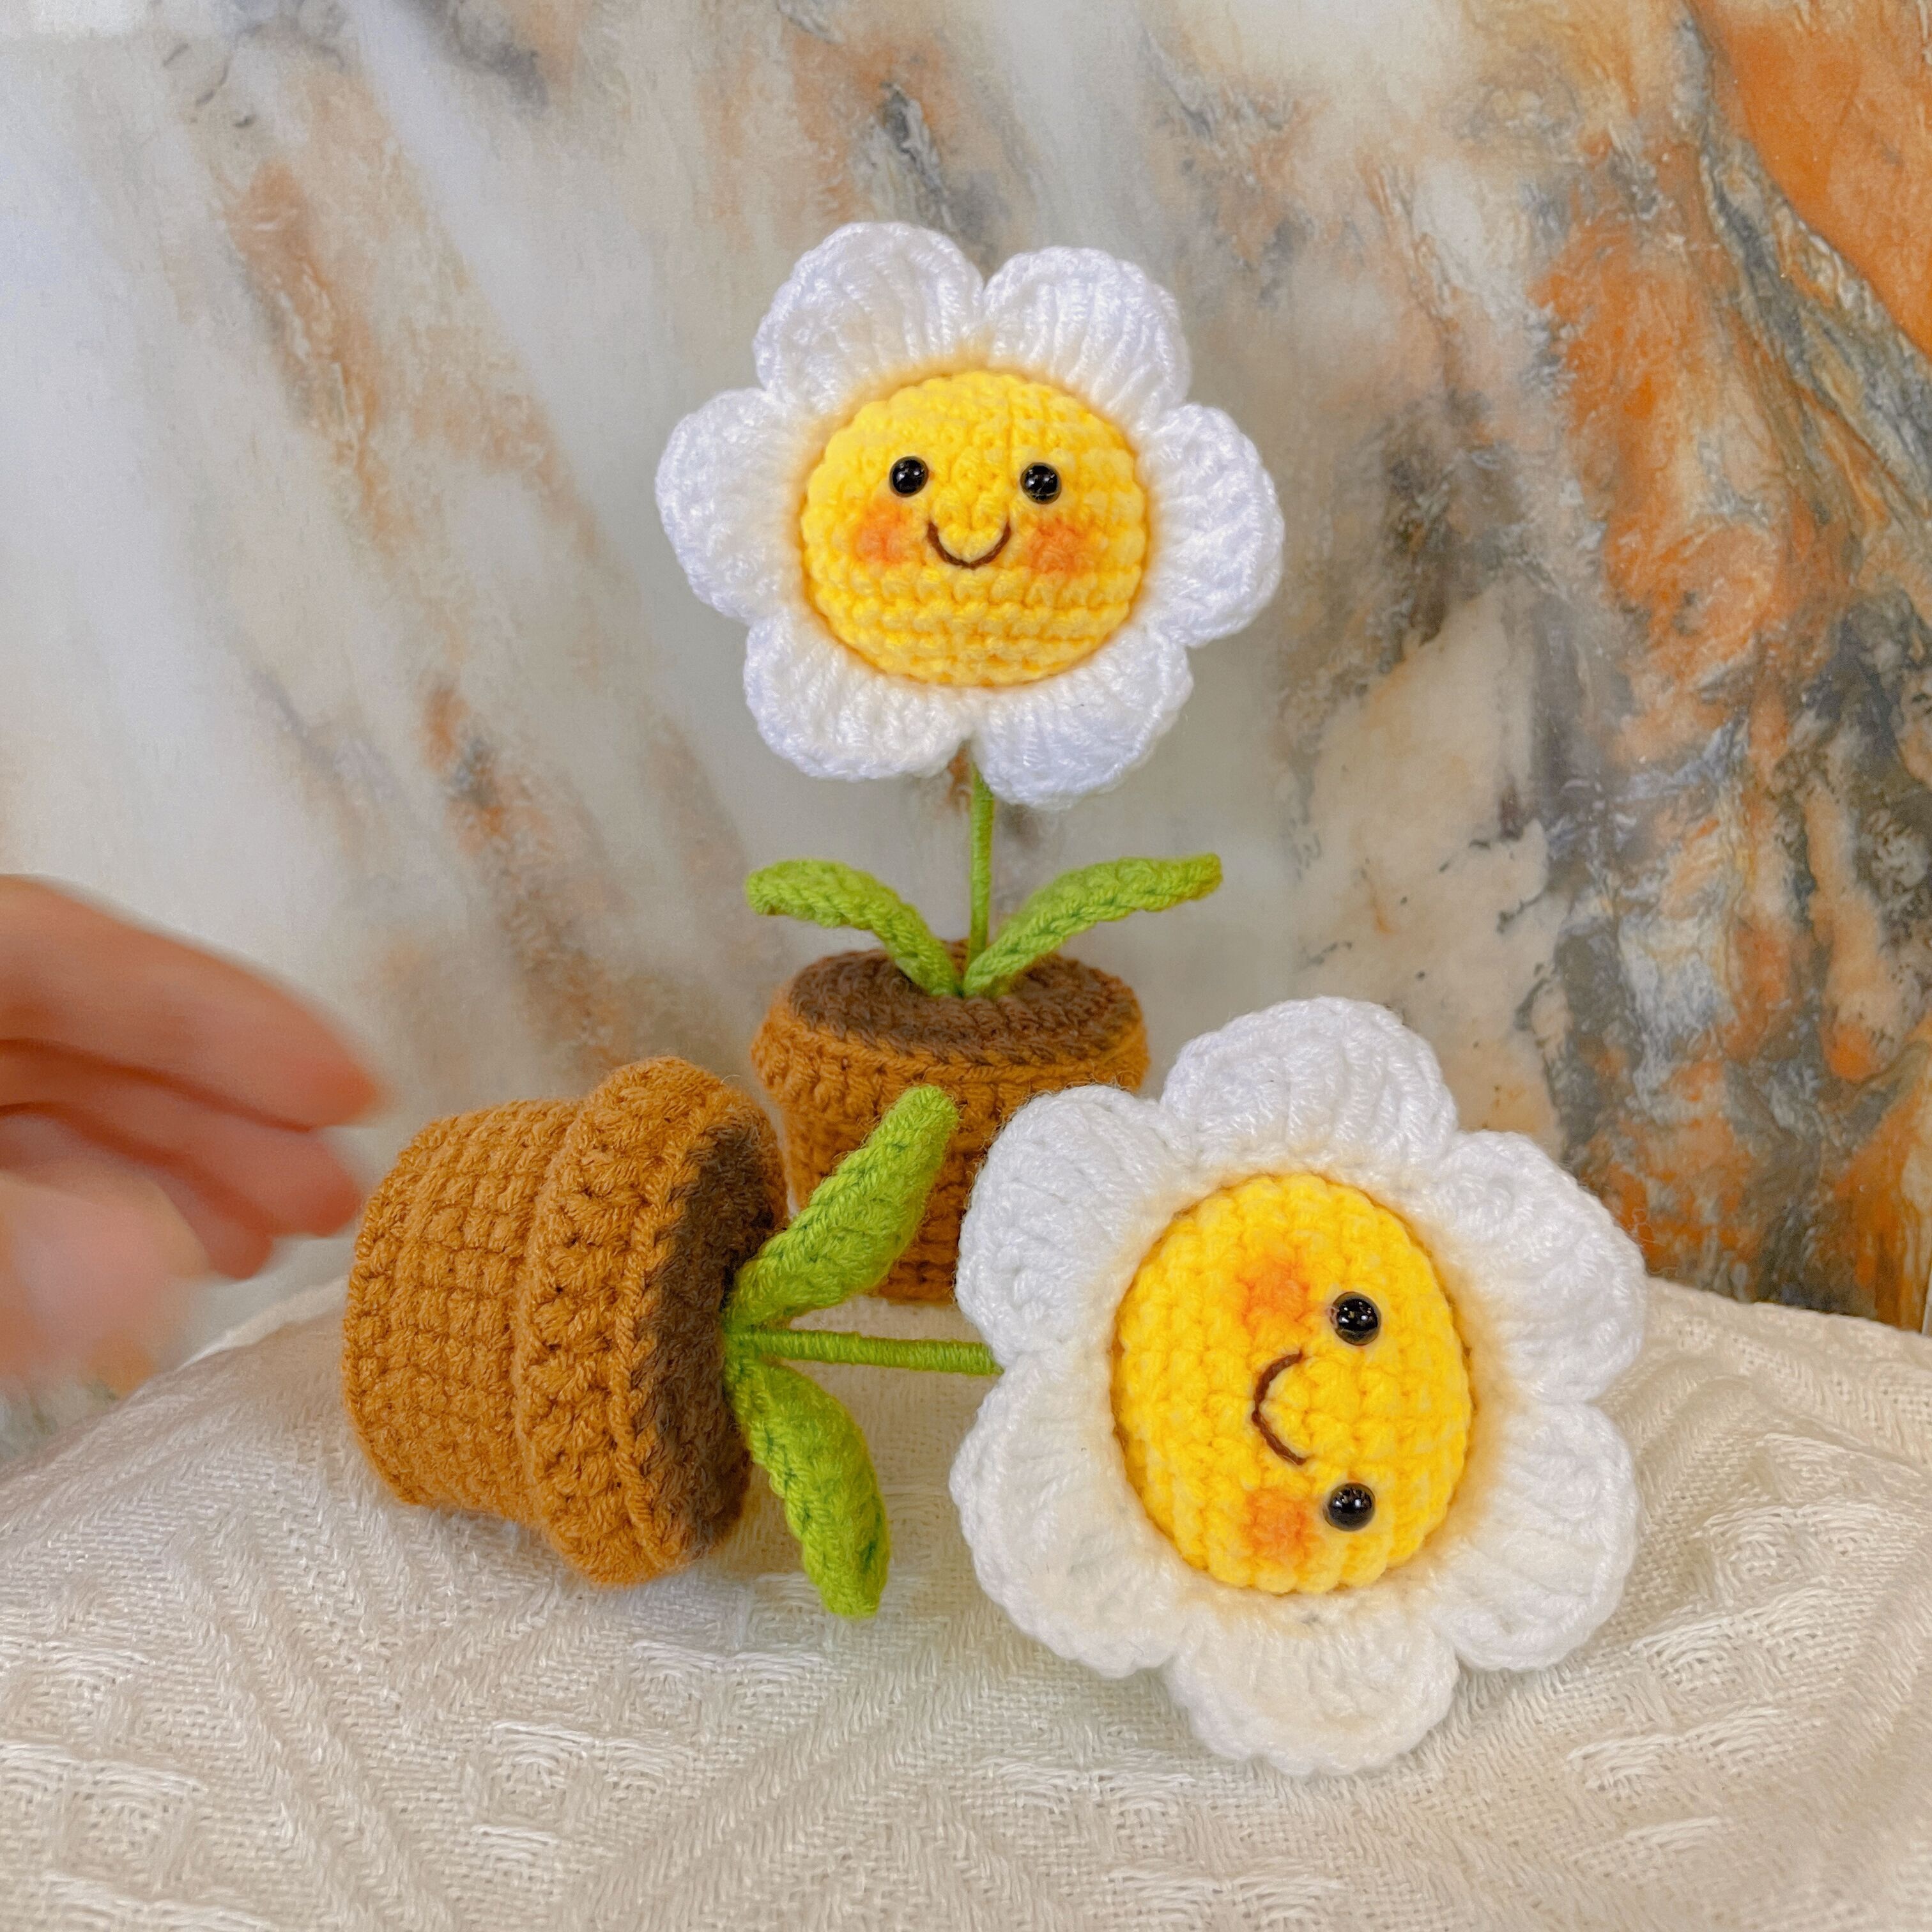 Crochet Flower Bouquet ,Home Decoration,Knitted Flower for